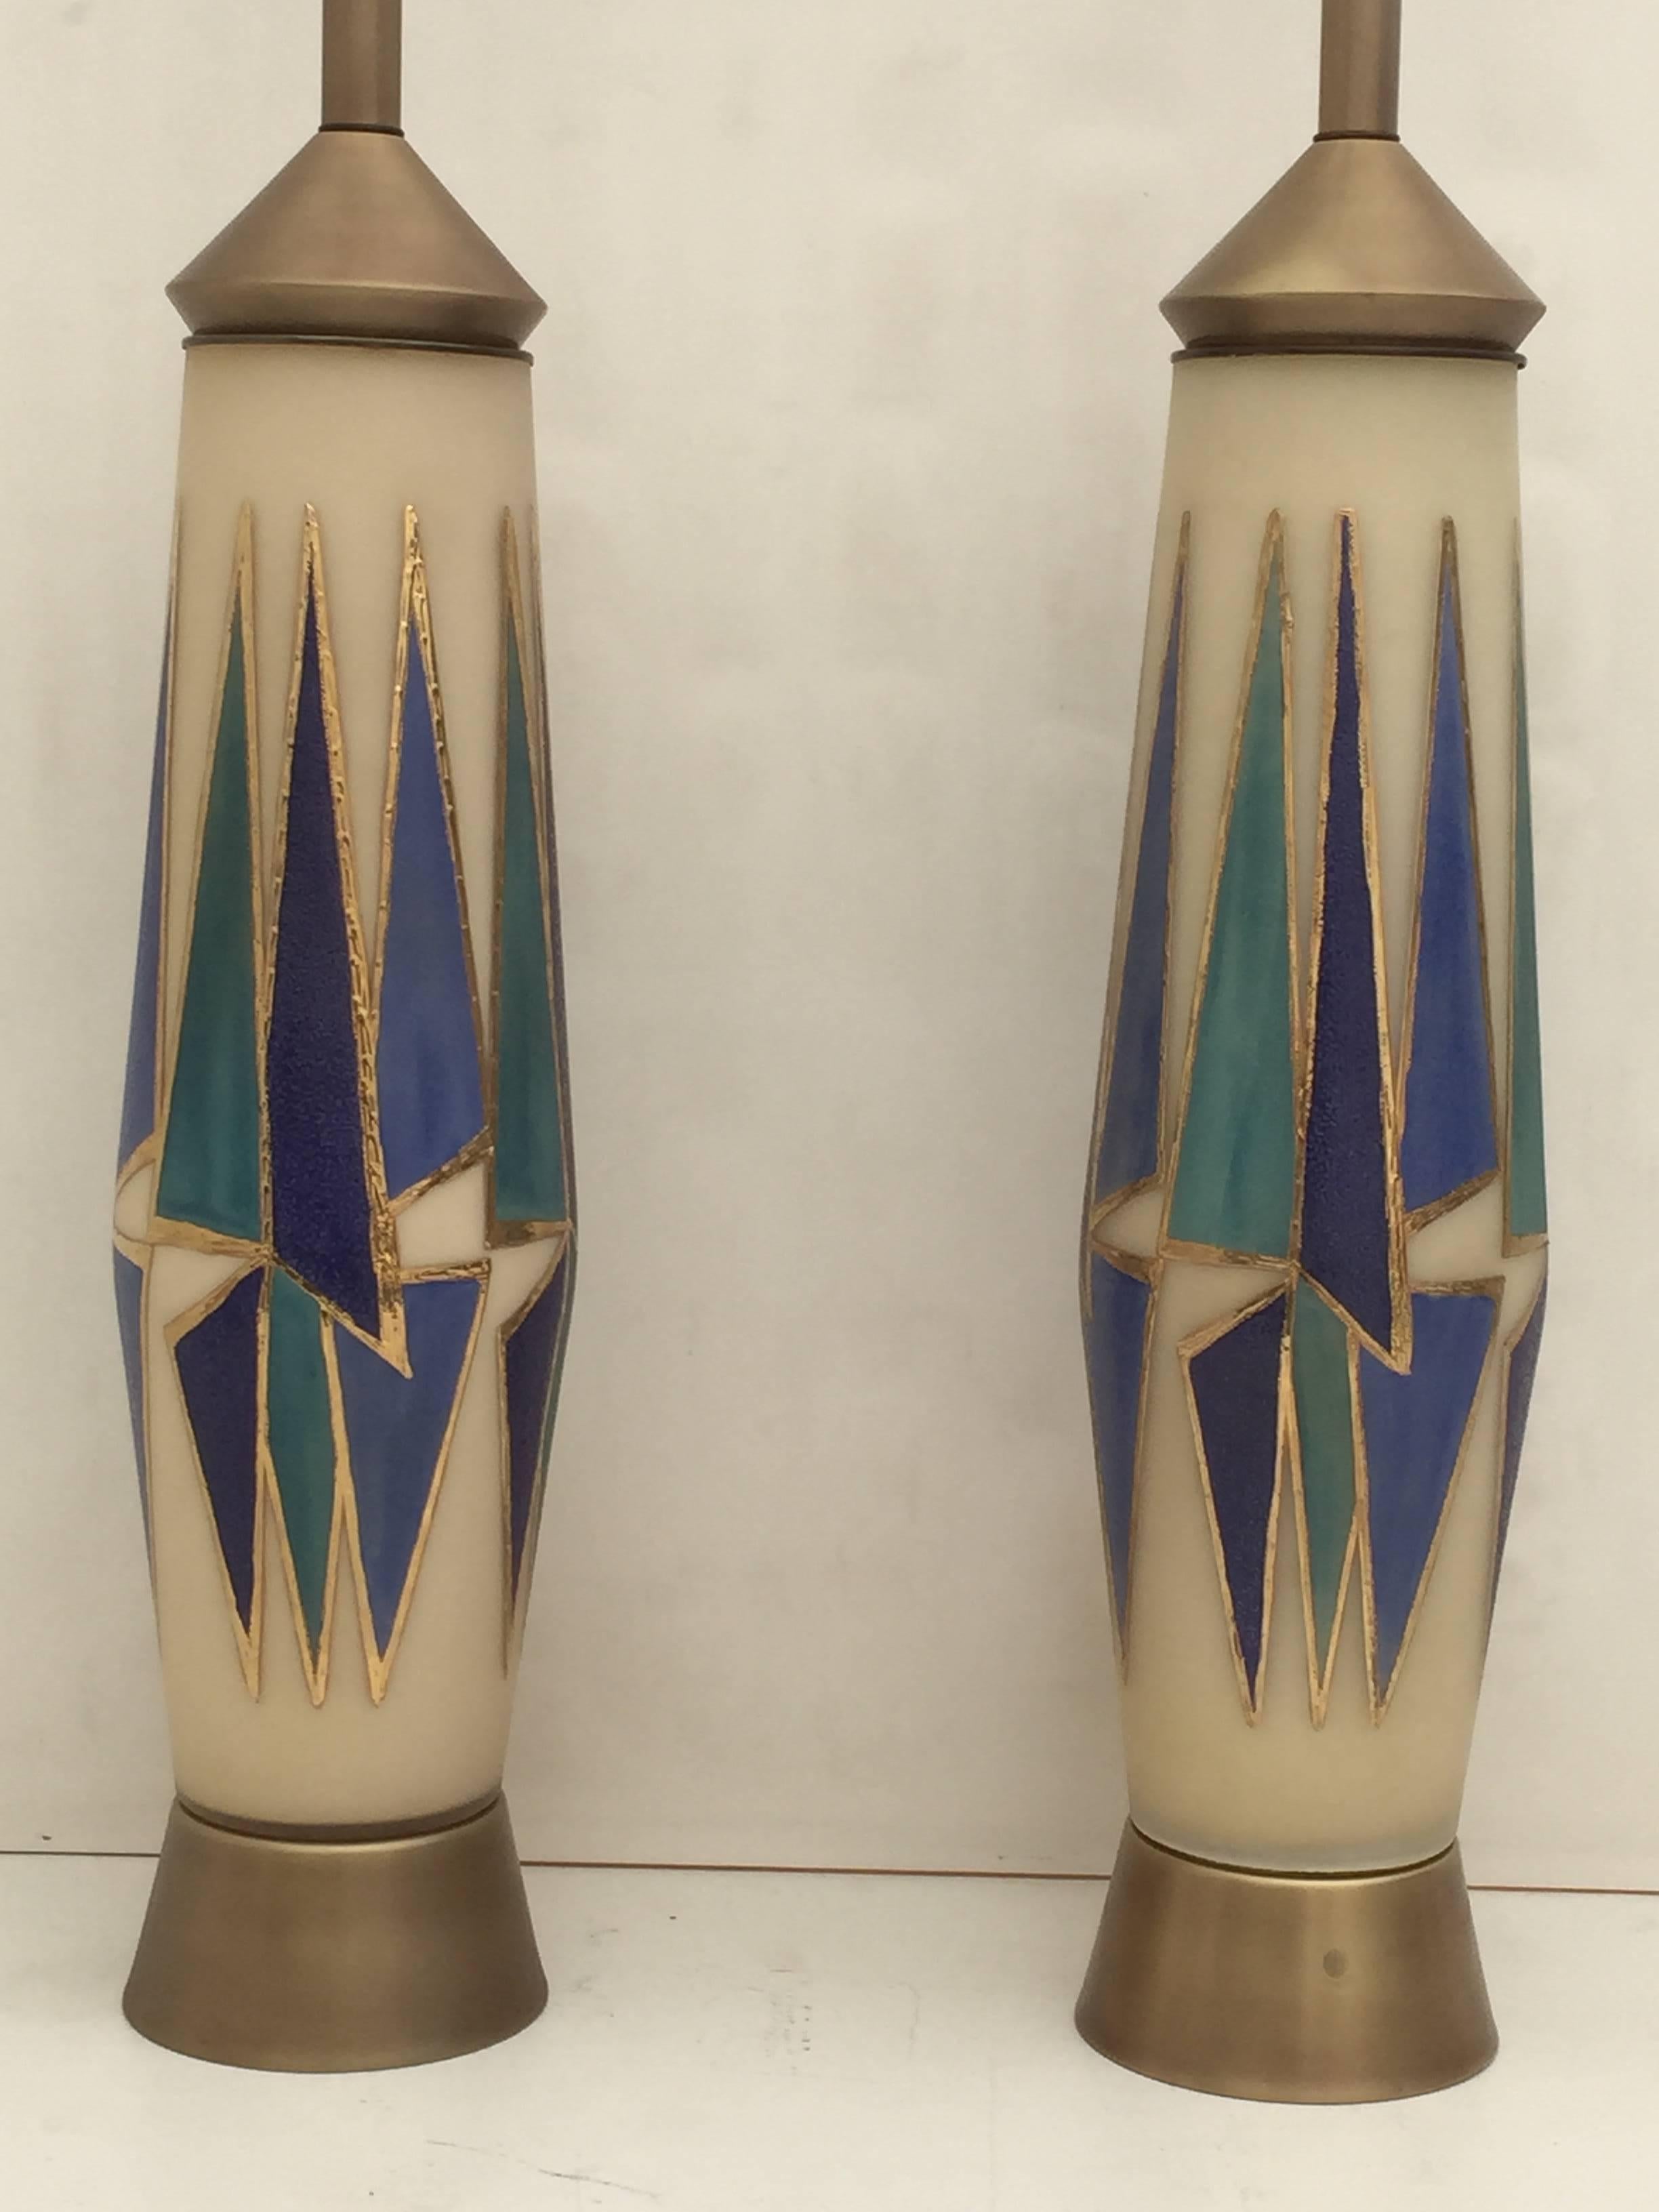 Pair of Mid-Century Modern giant opaline glass lamps with antique brass hardware and abstract gold and cobalt blue design.